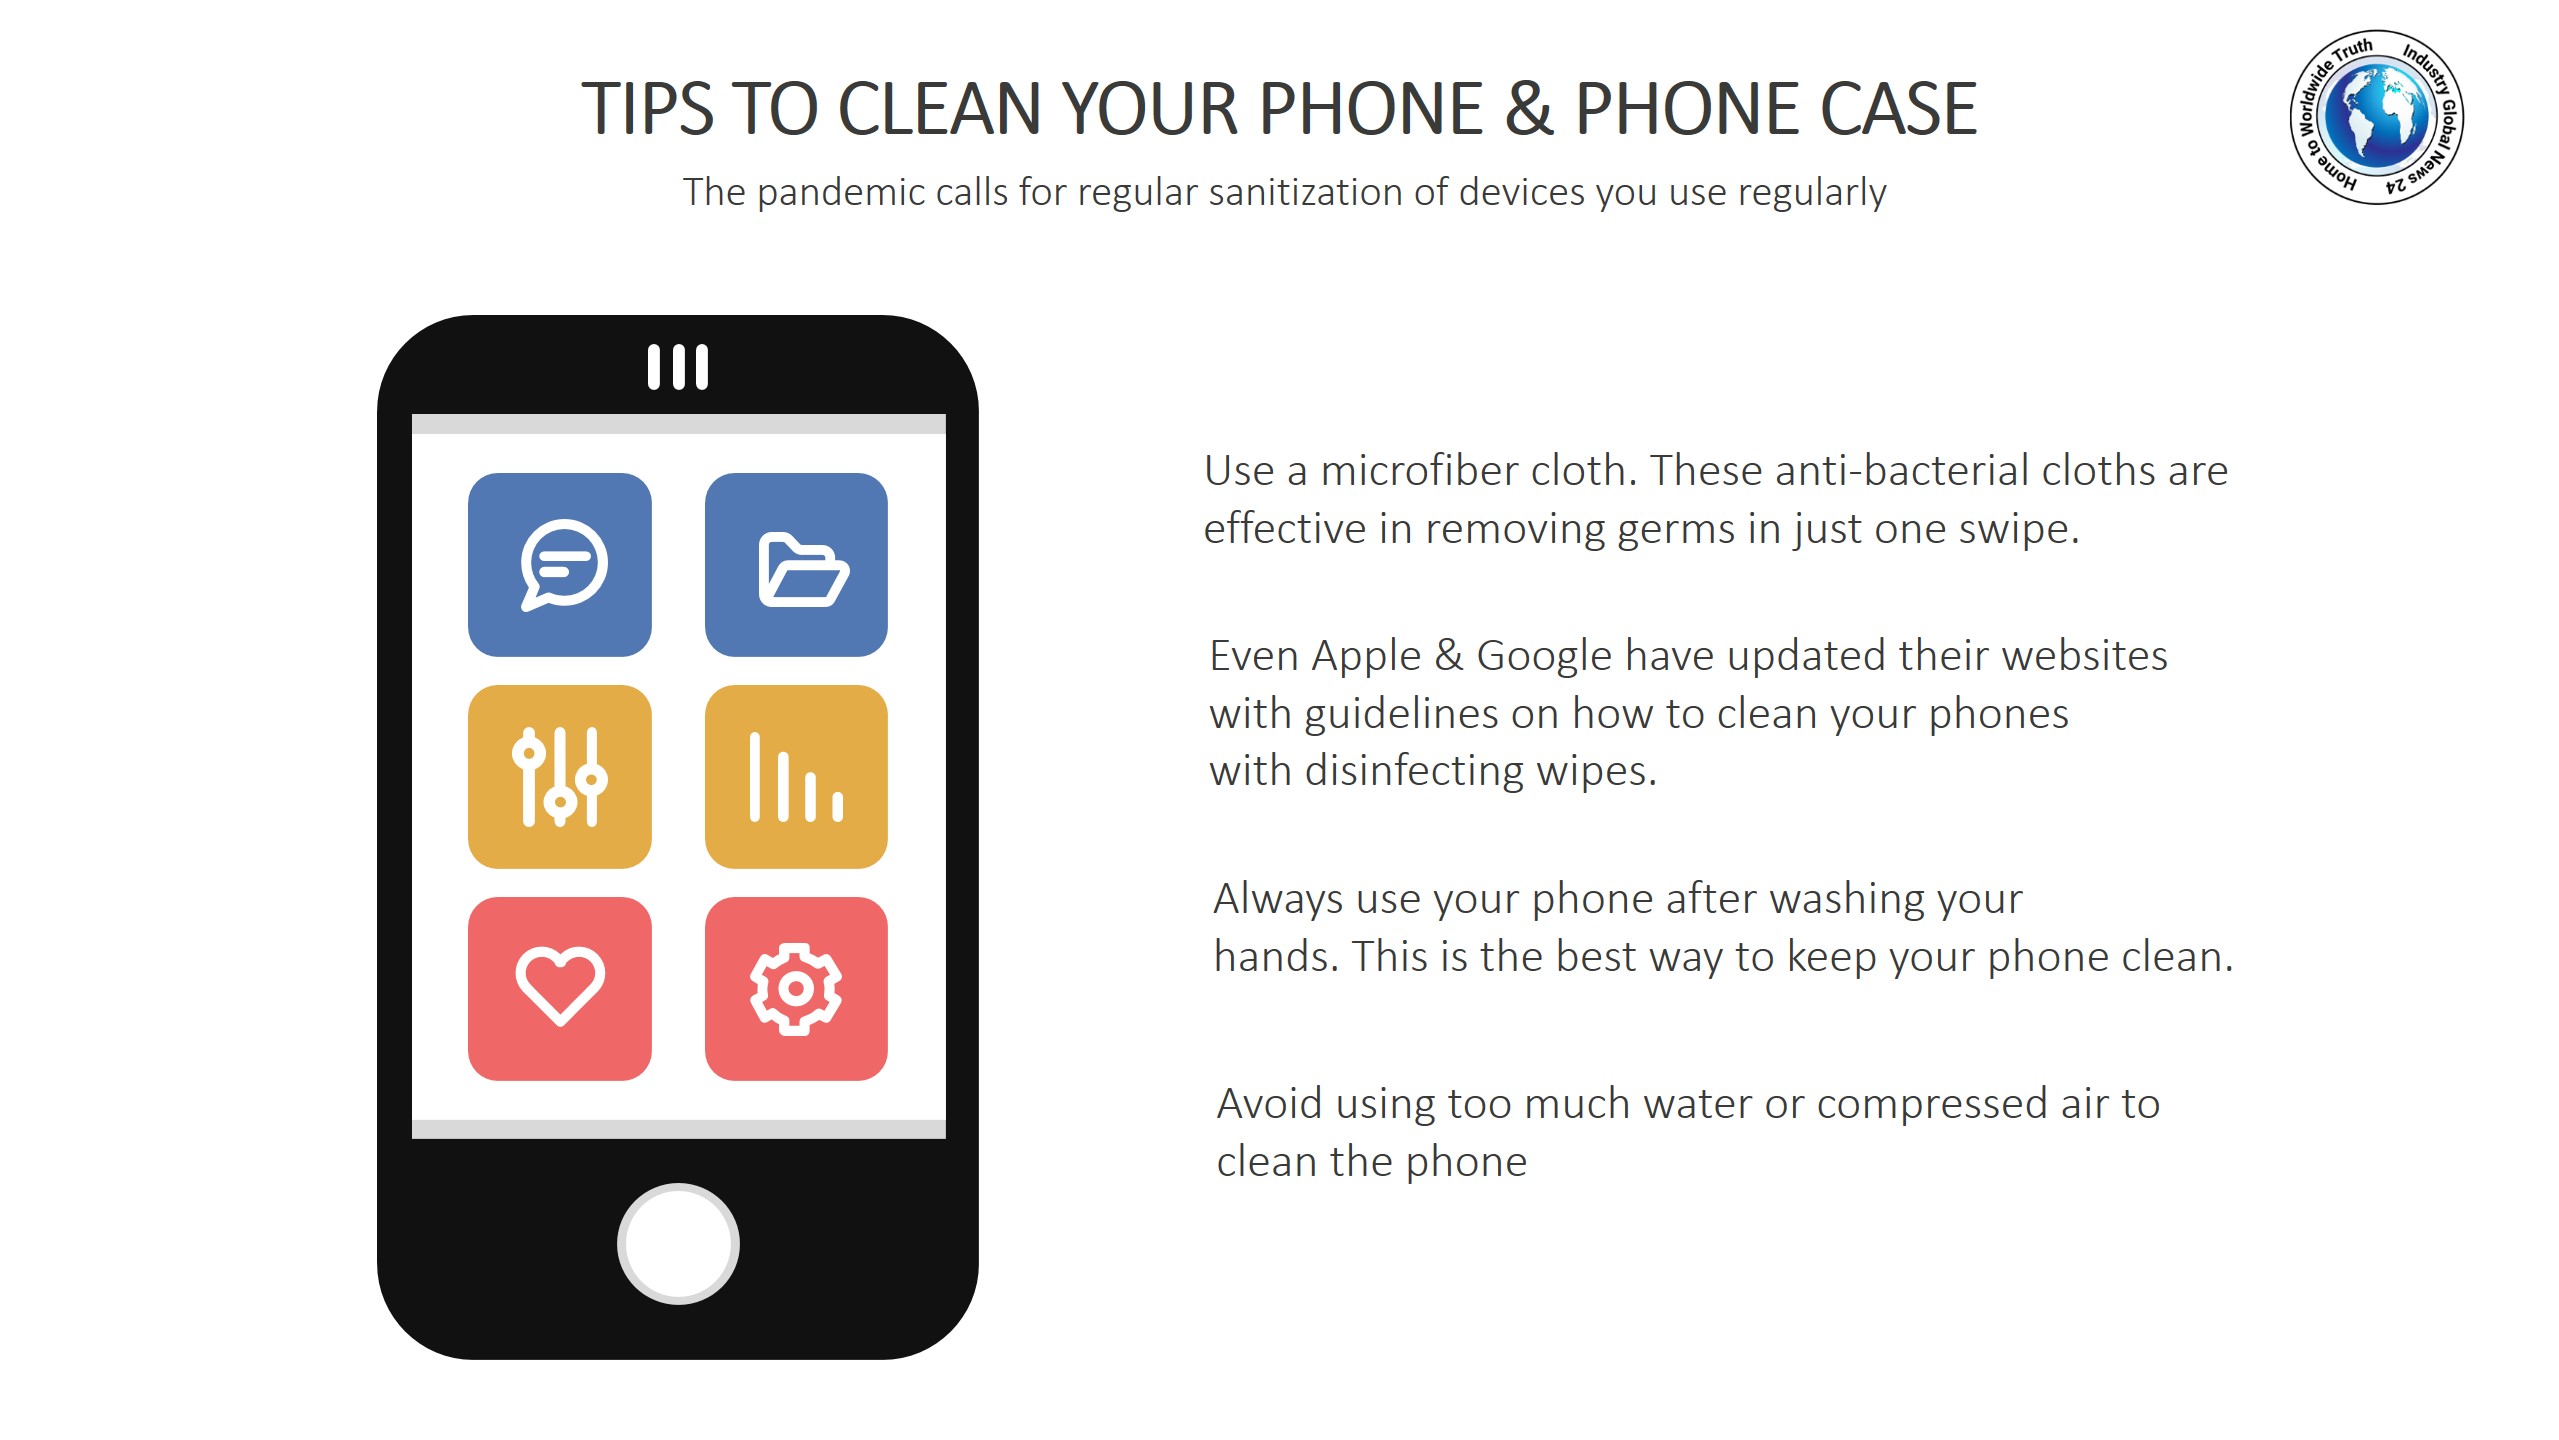 Tips to clean your phone & phone case